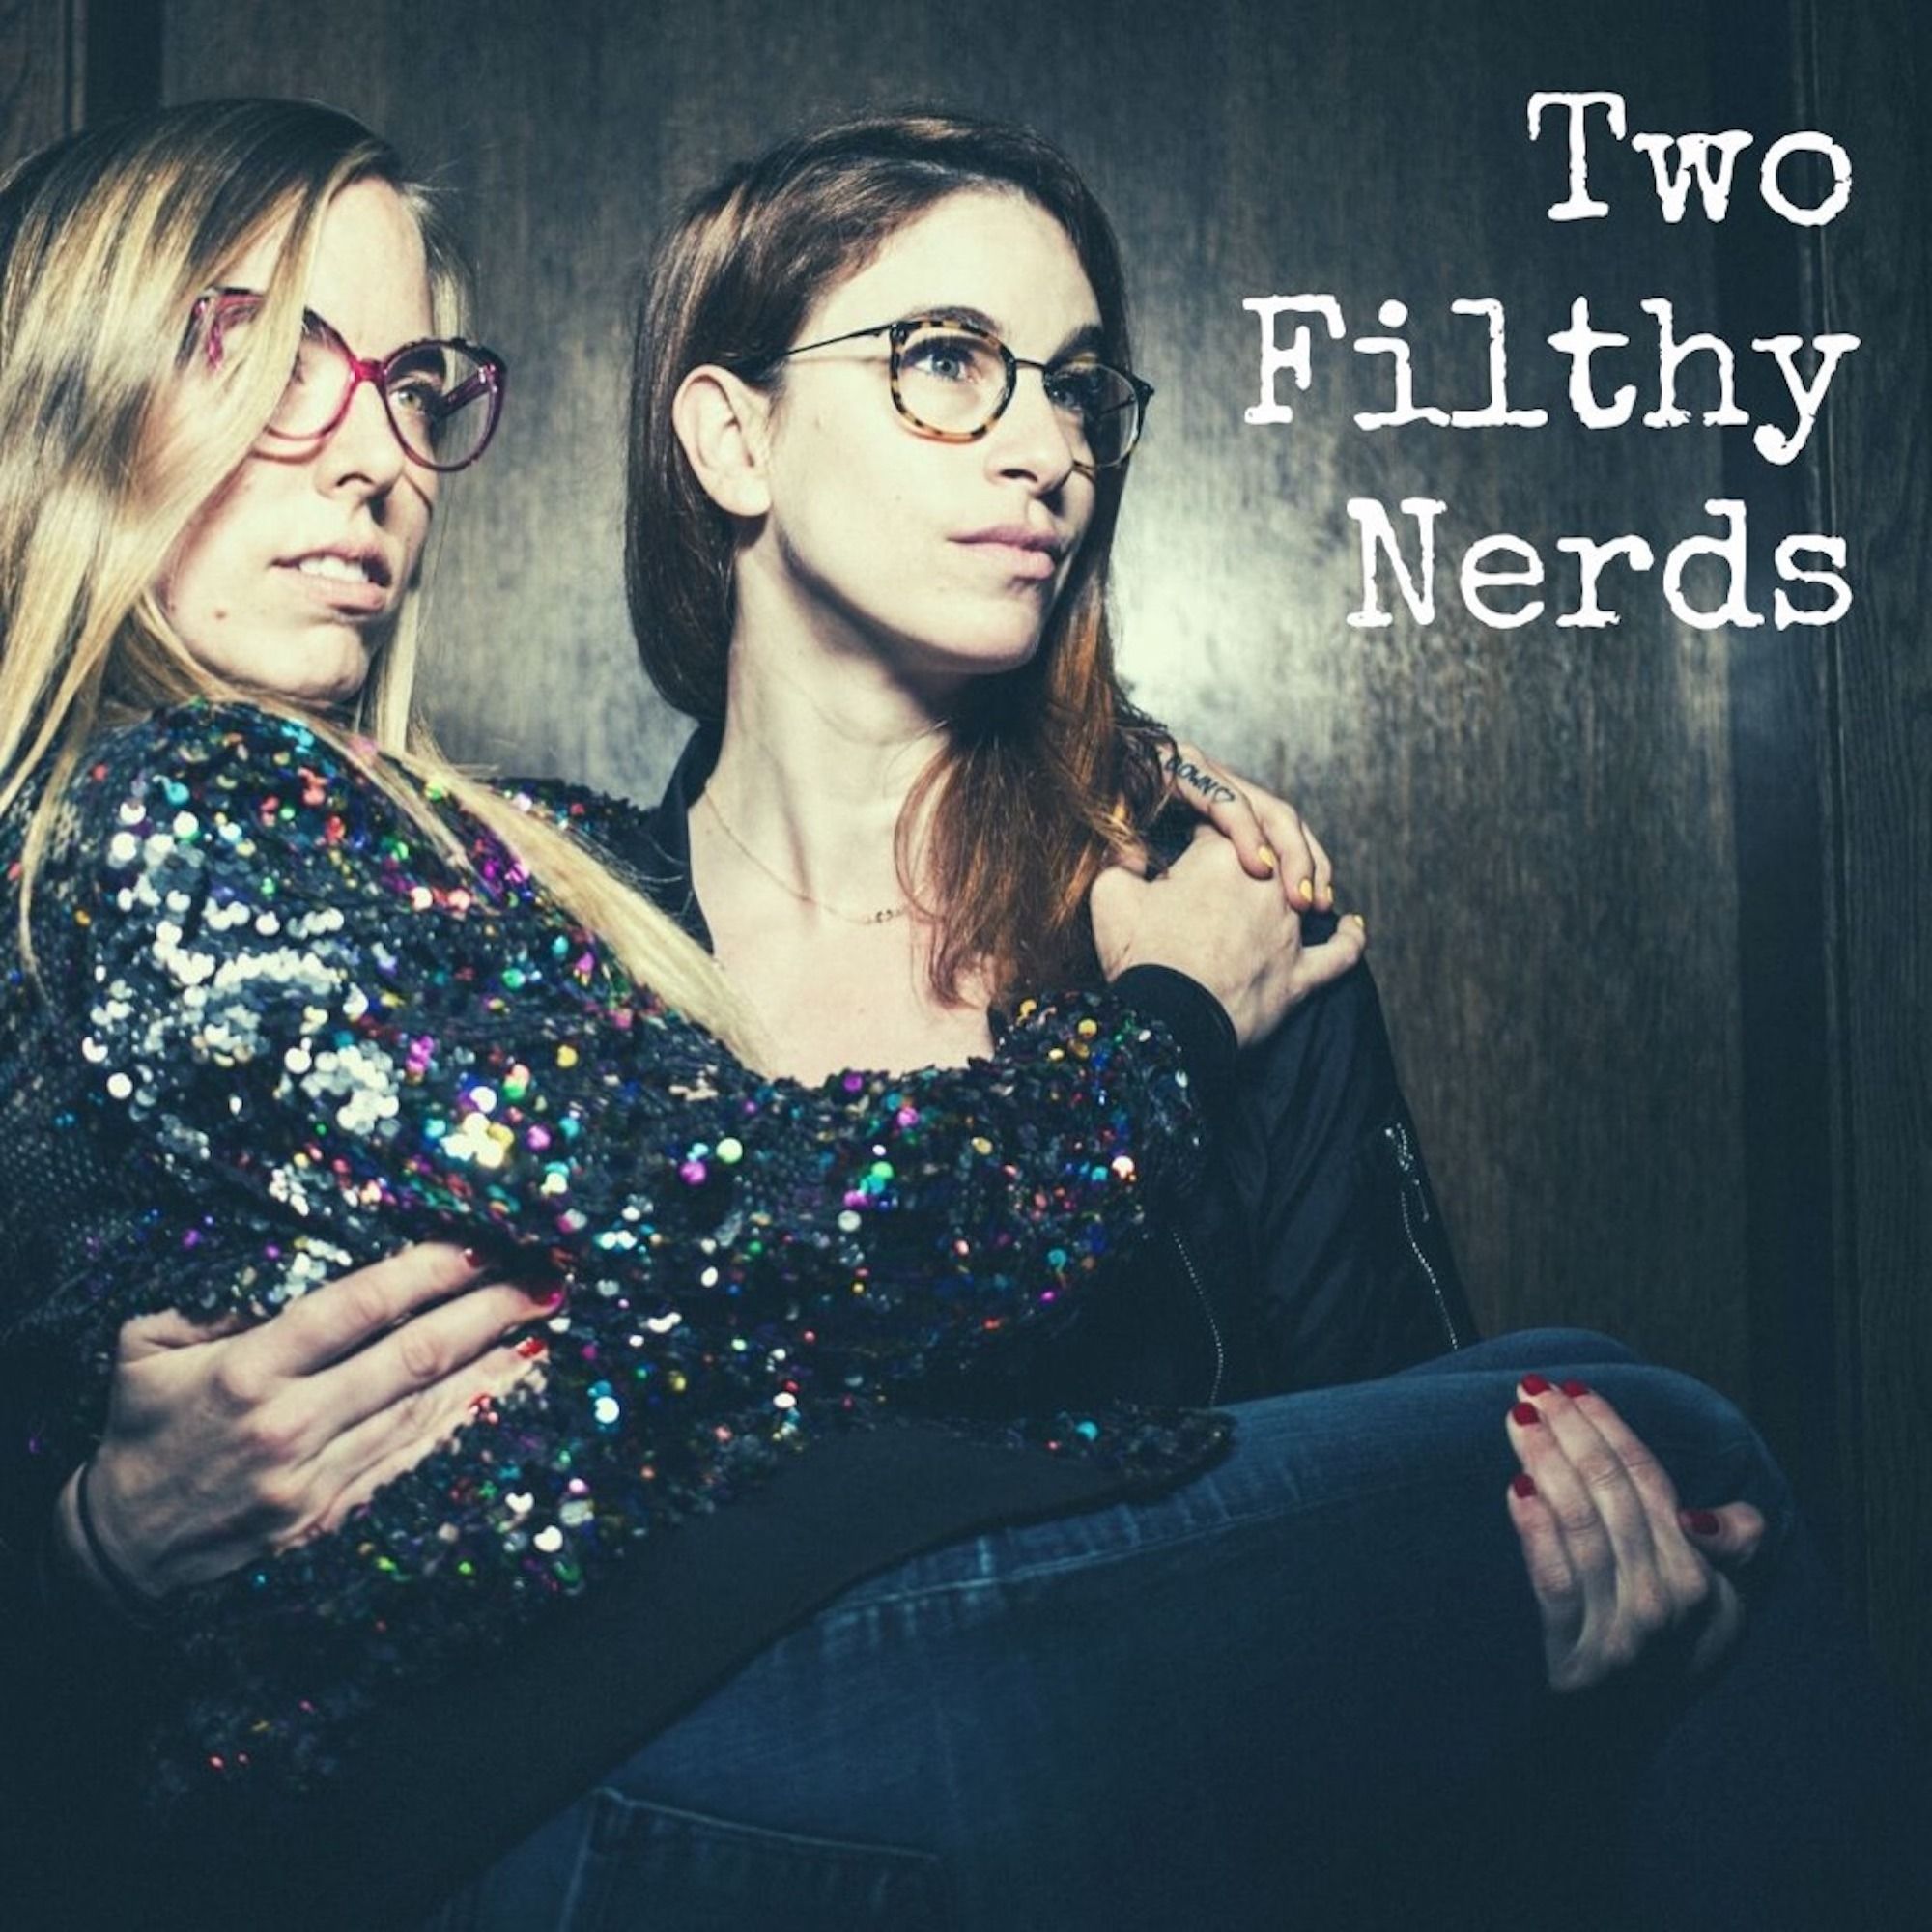 Two Filthy Nerds Podcast Cover - Square